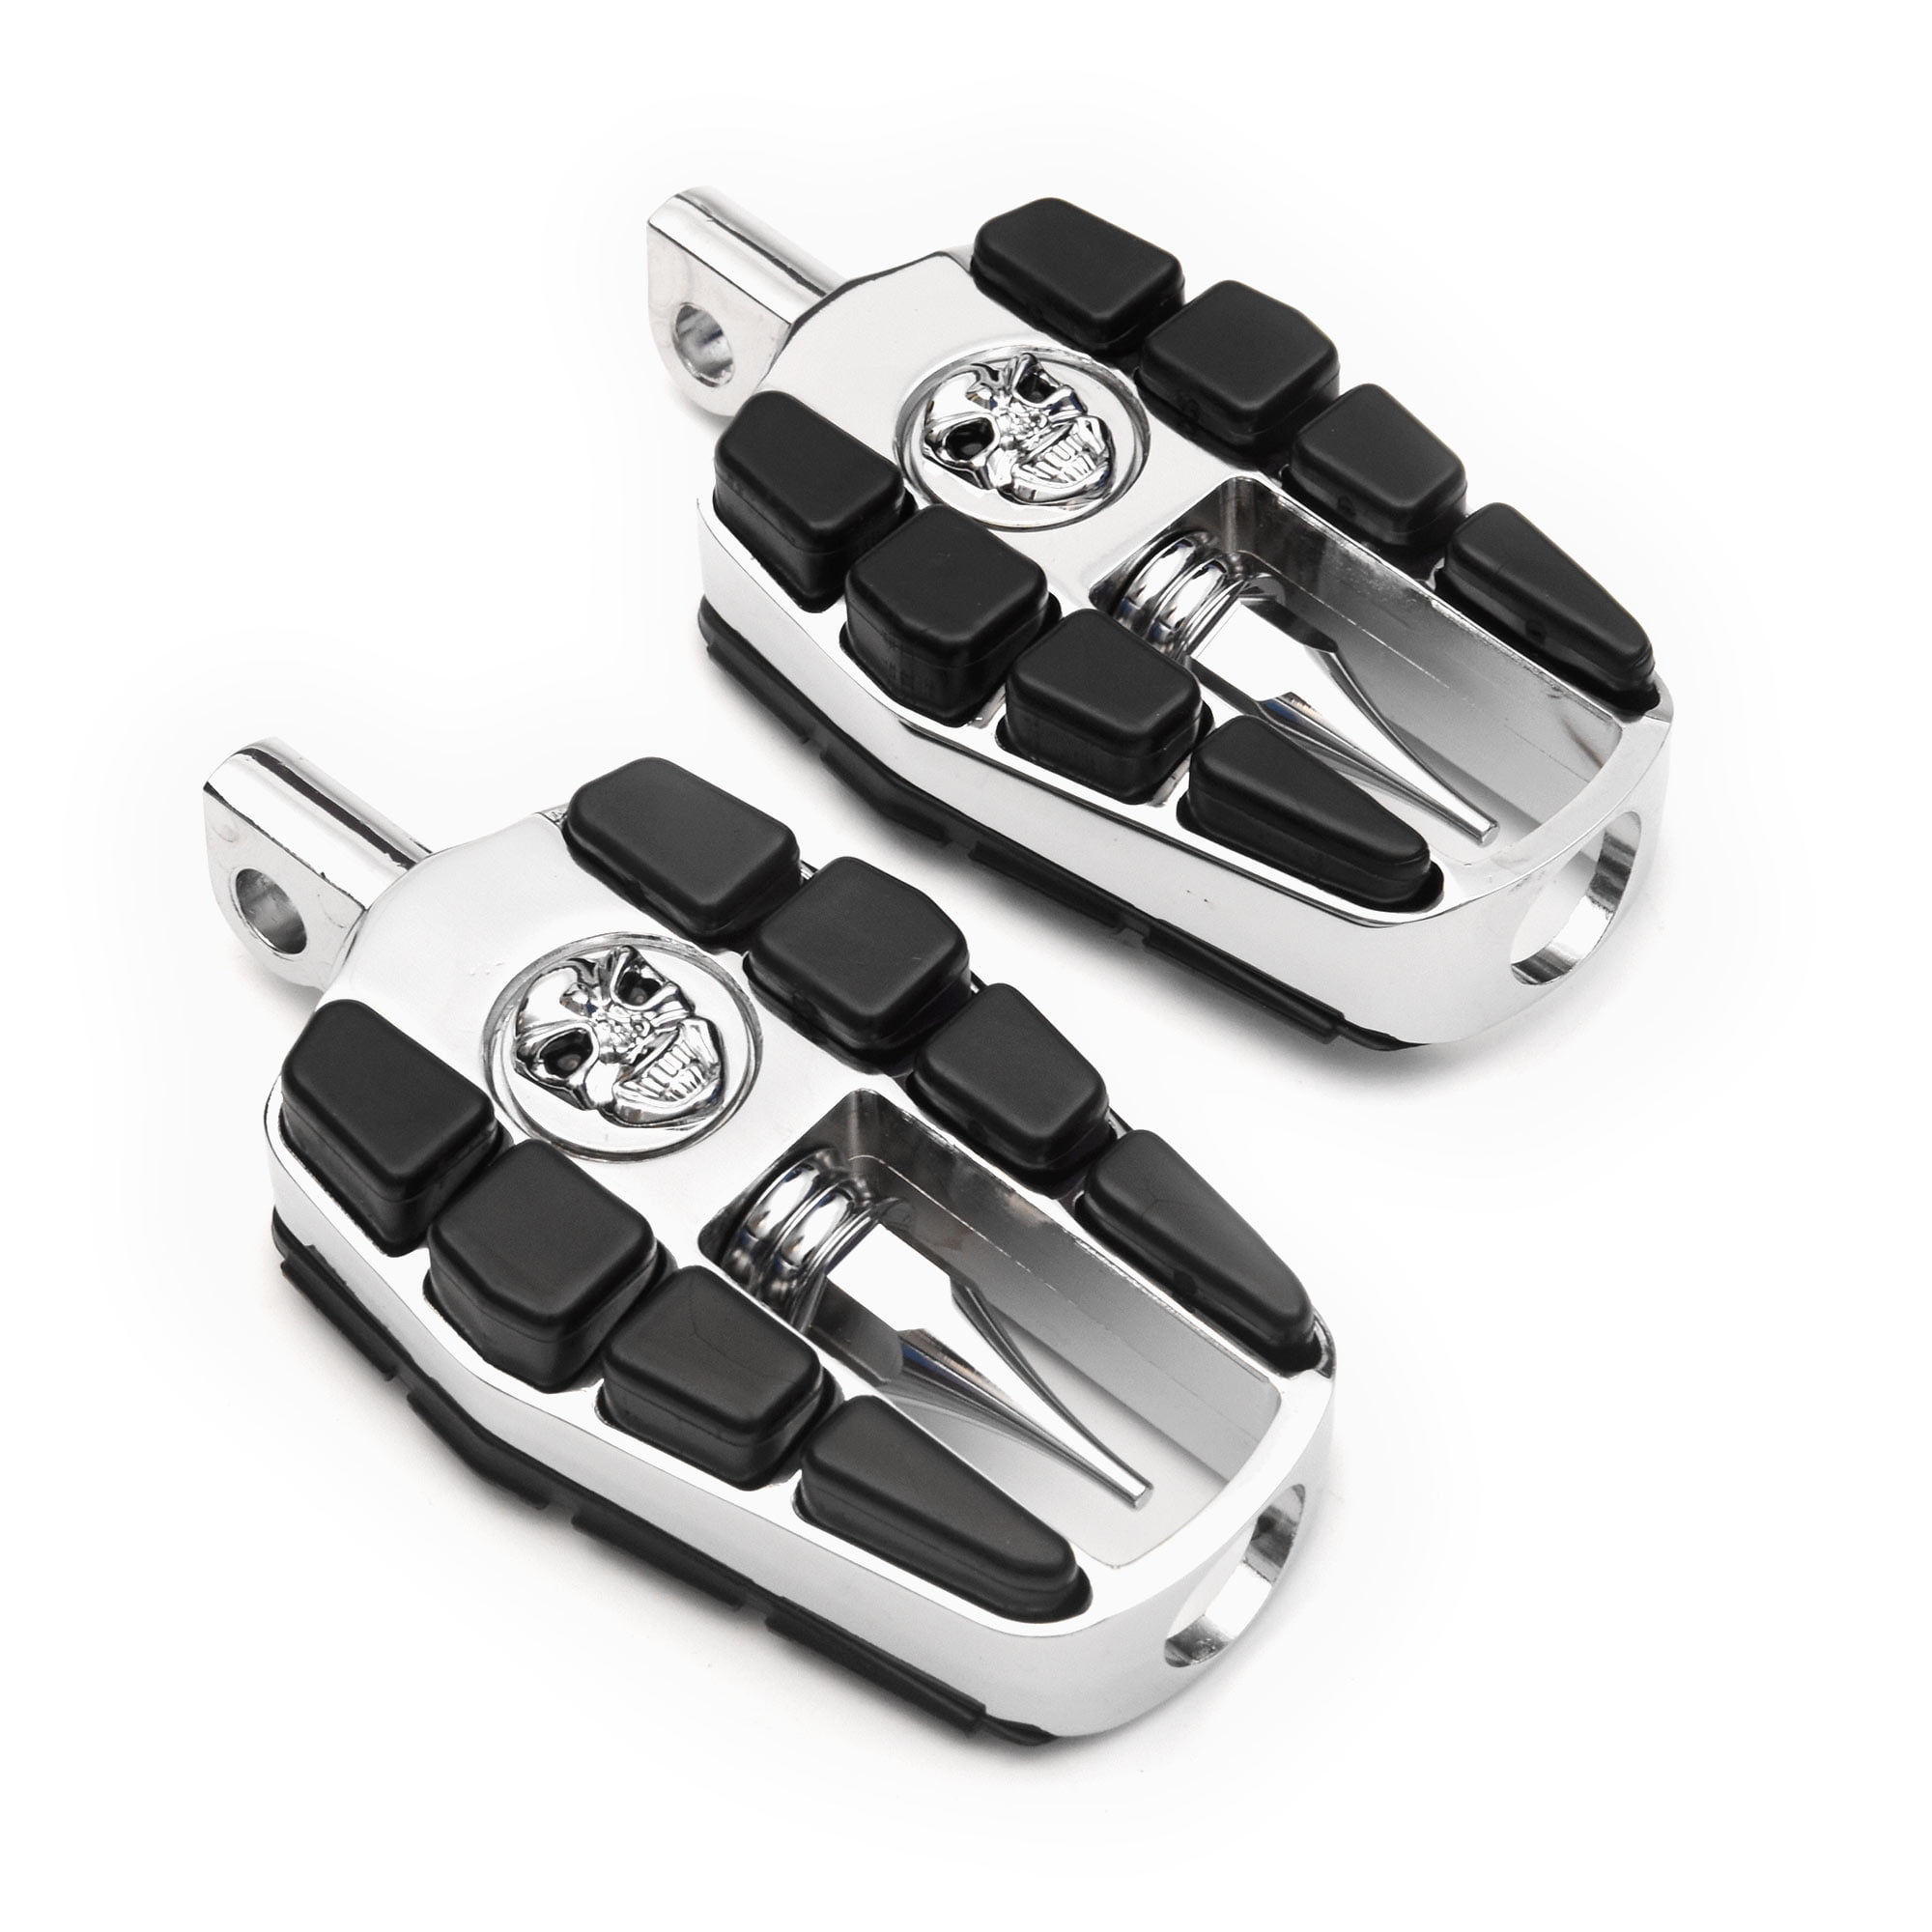 Motorcycle Aluminum Foot Pegs Fit For Harley Electra Glide Ultra Classic FLHTCU